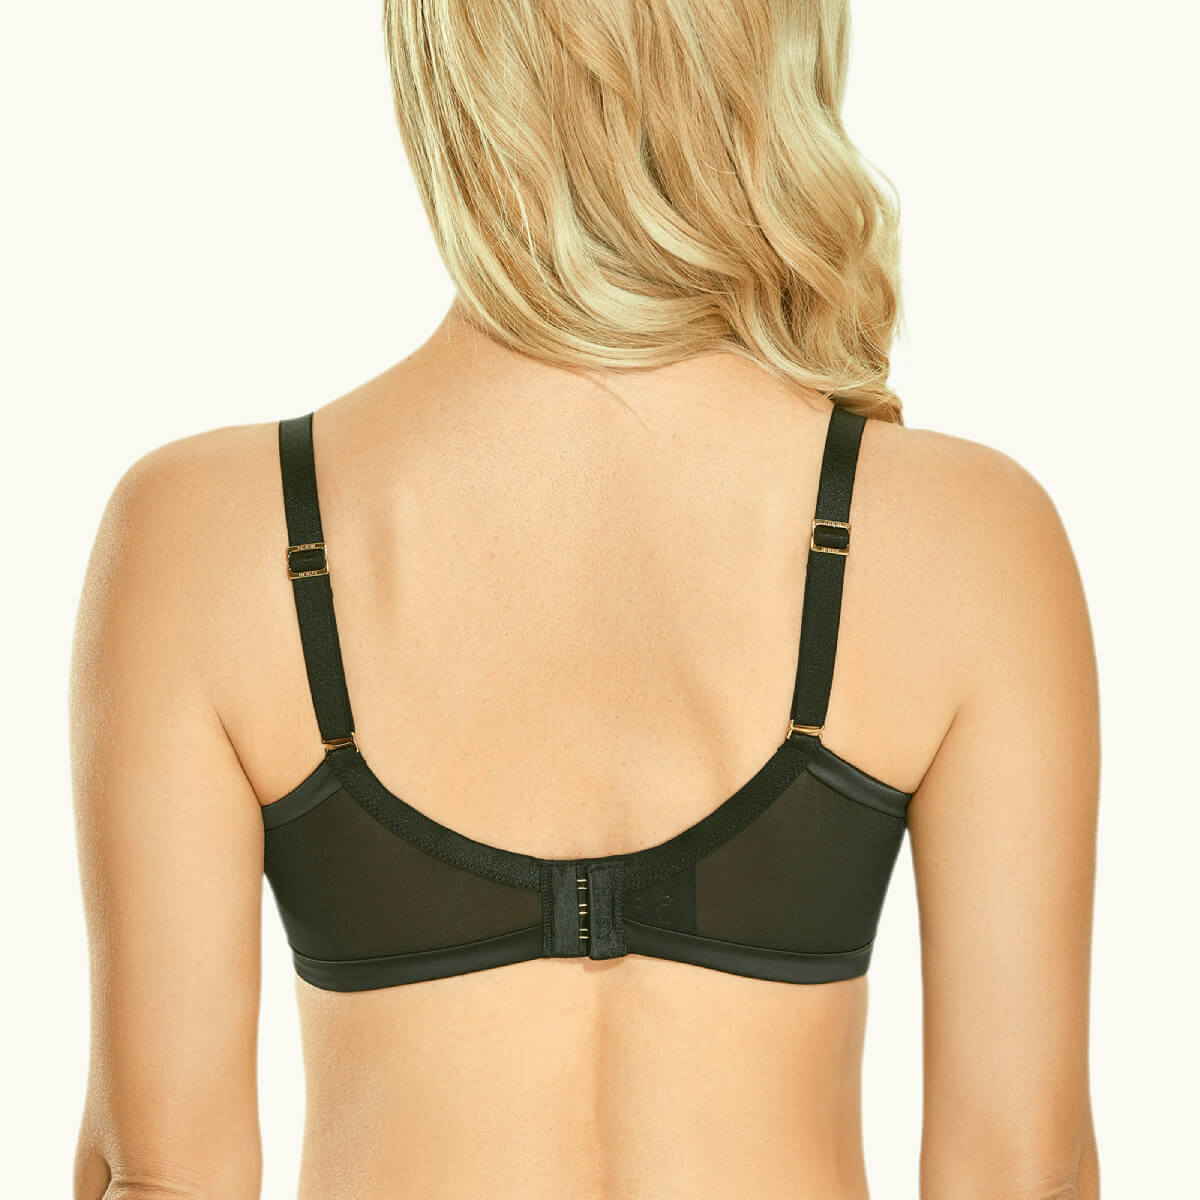 Free Shipping 3/4 Cup Bra Size 32A 34A 36A 38A Brassiere Sexy